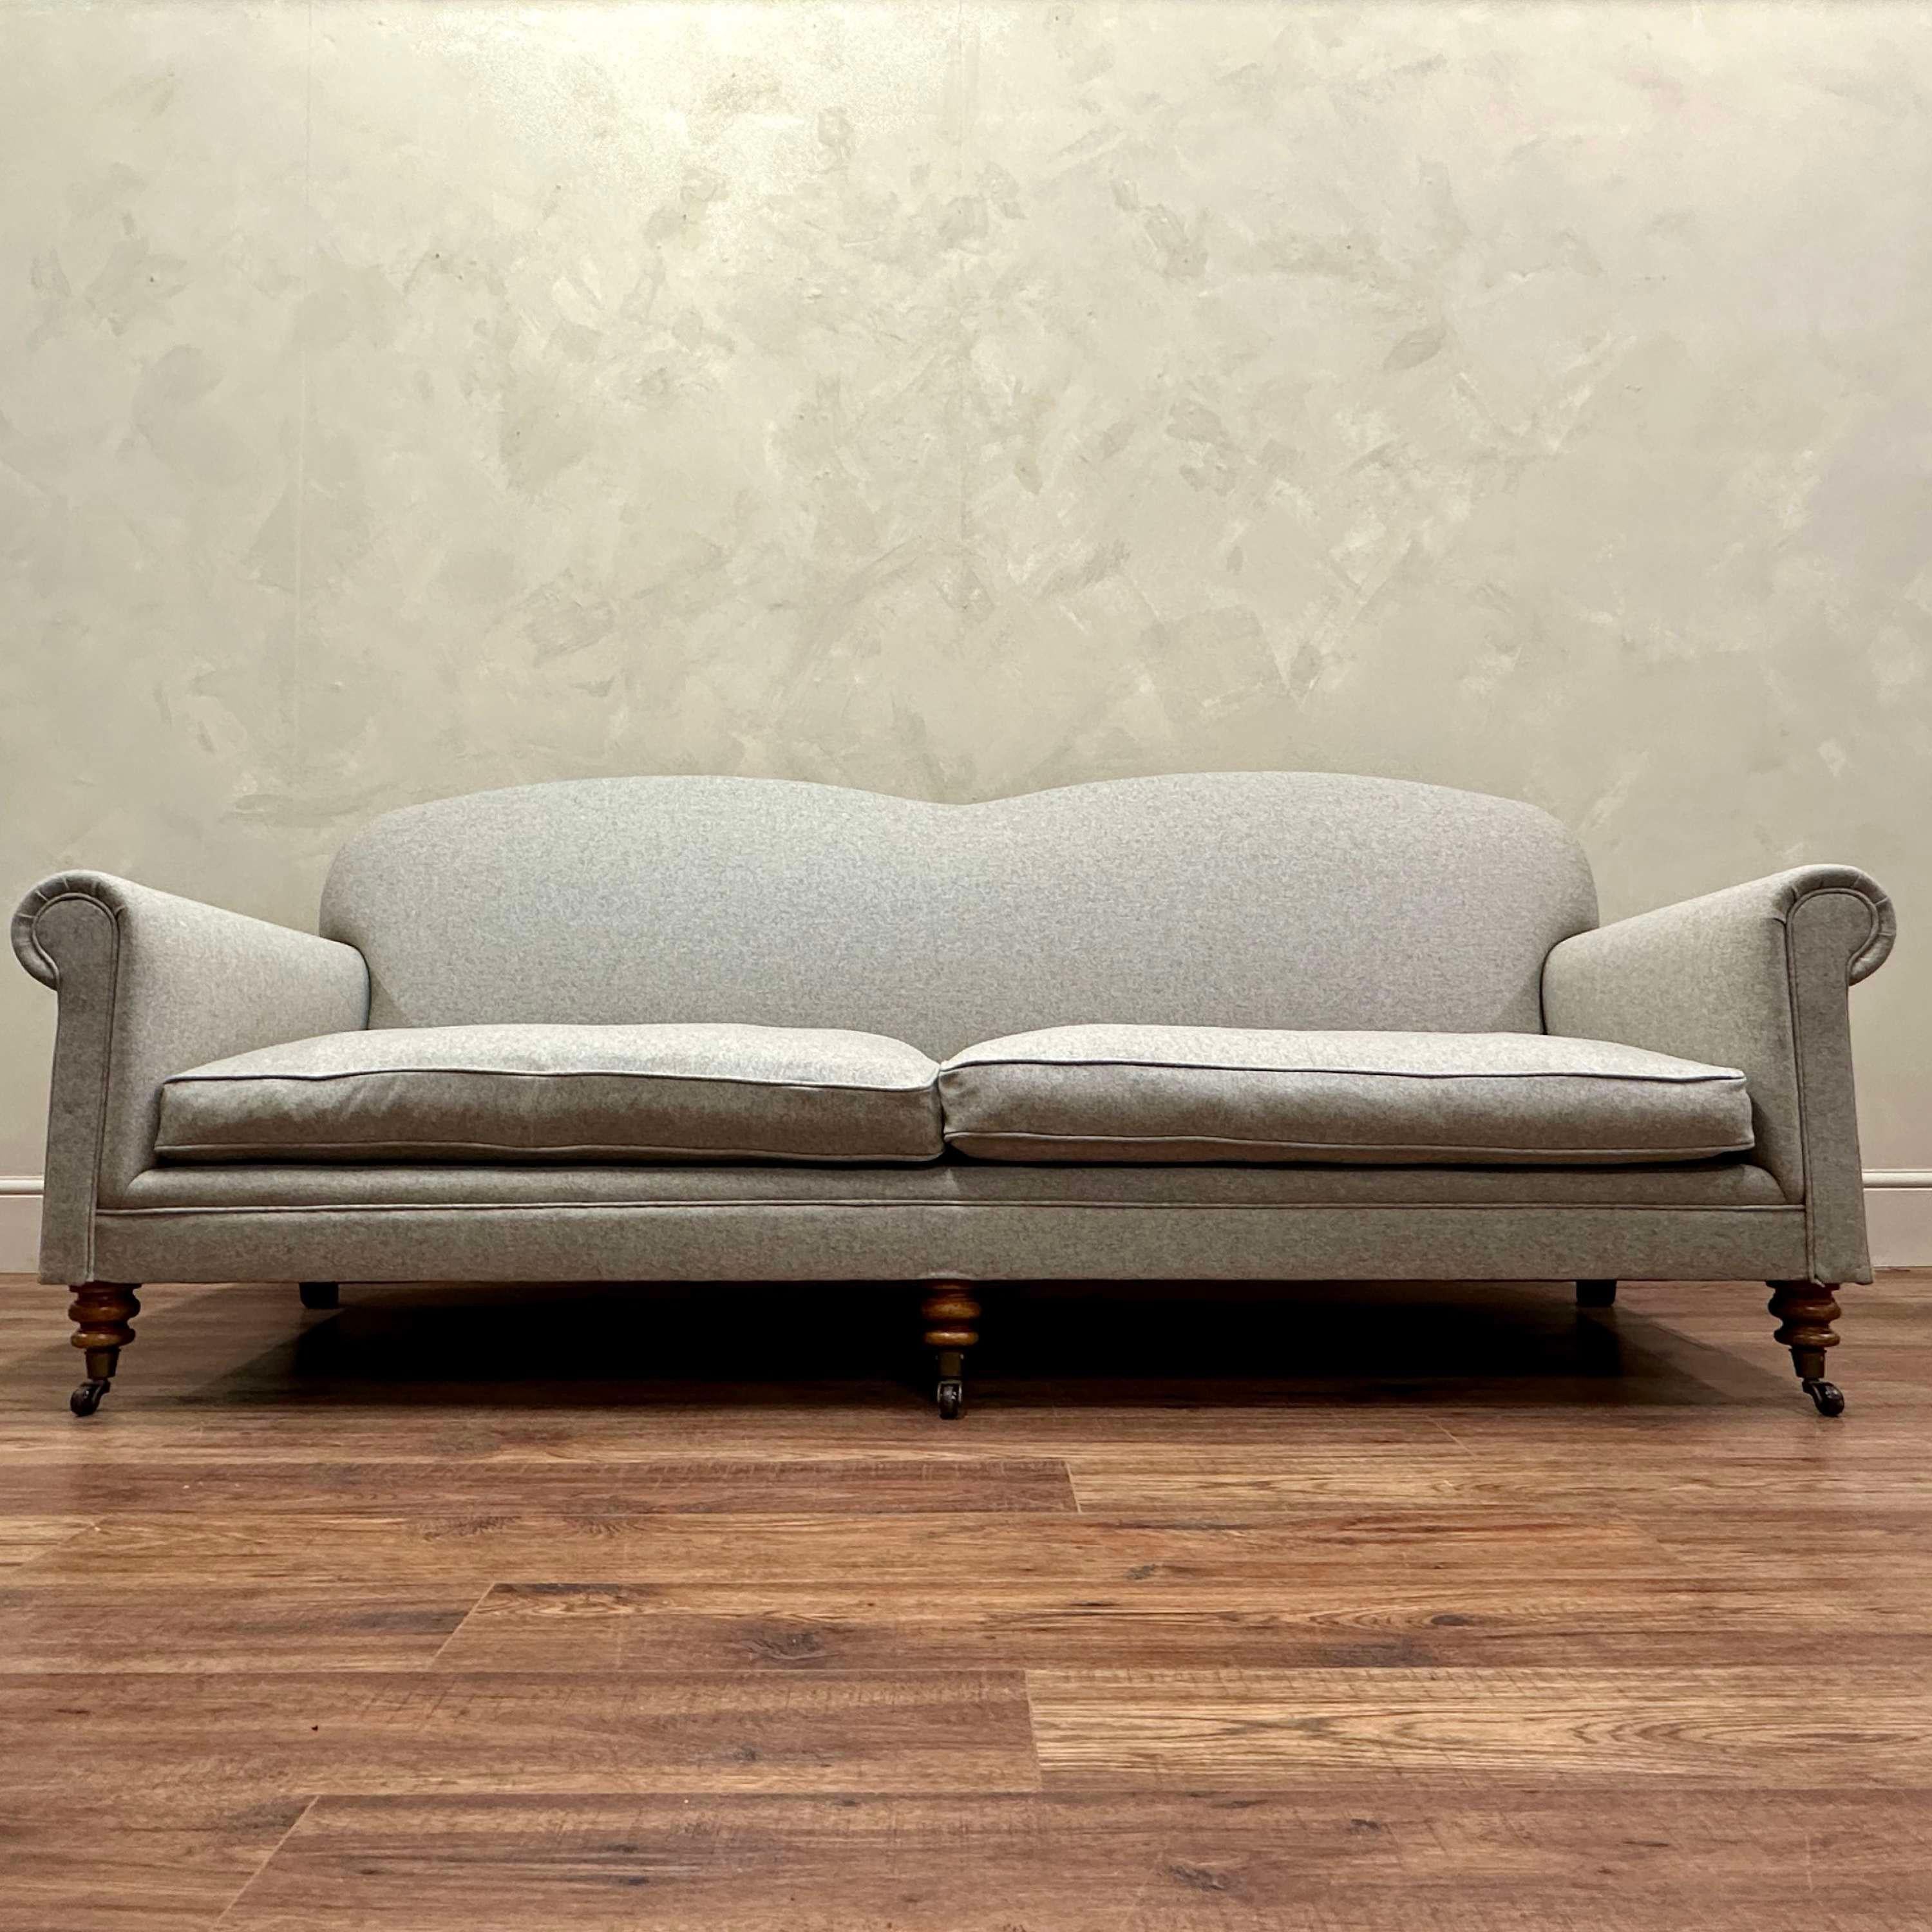 Large, Camel Back Sofa, upholstered in a soft-touch, plain Cotswold Wool in a grey/beige neutral which is fire retardant.
Deep filled feather seat cushions.
Resprung and webbed.
Original turned legs and casters.
England c 1900

Length: 220cm, Depth: